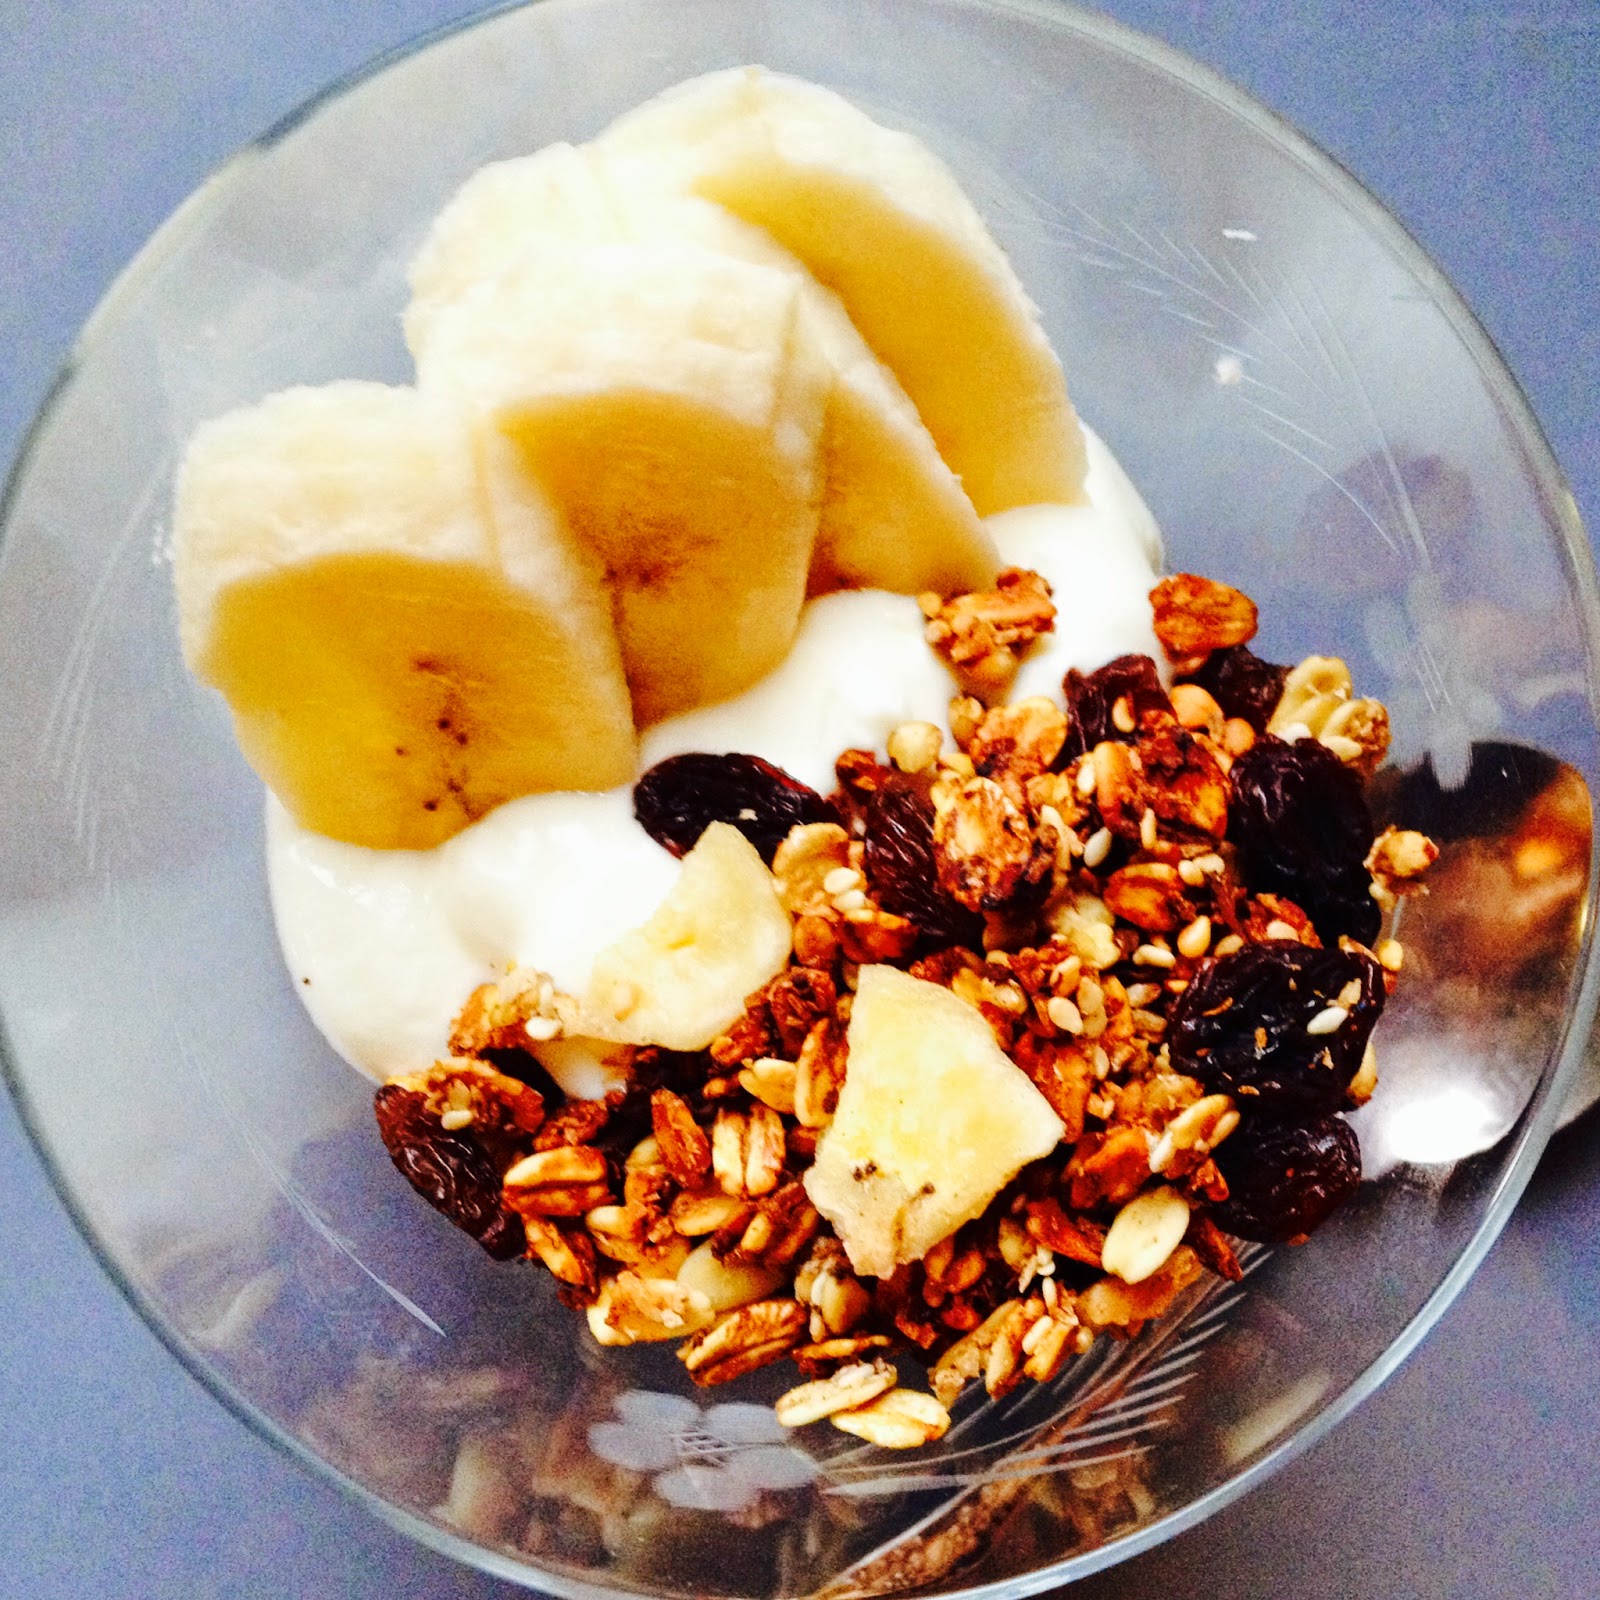 How To Make Banana Granola Credit: Lucy Corry/The Kitchenmaid